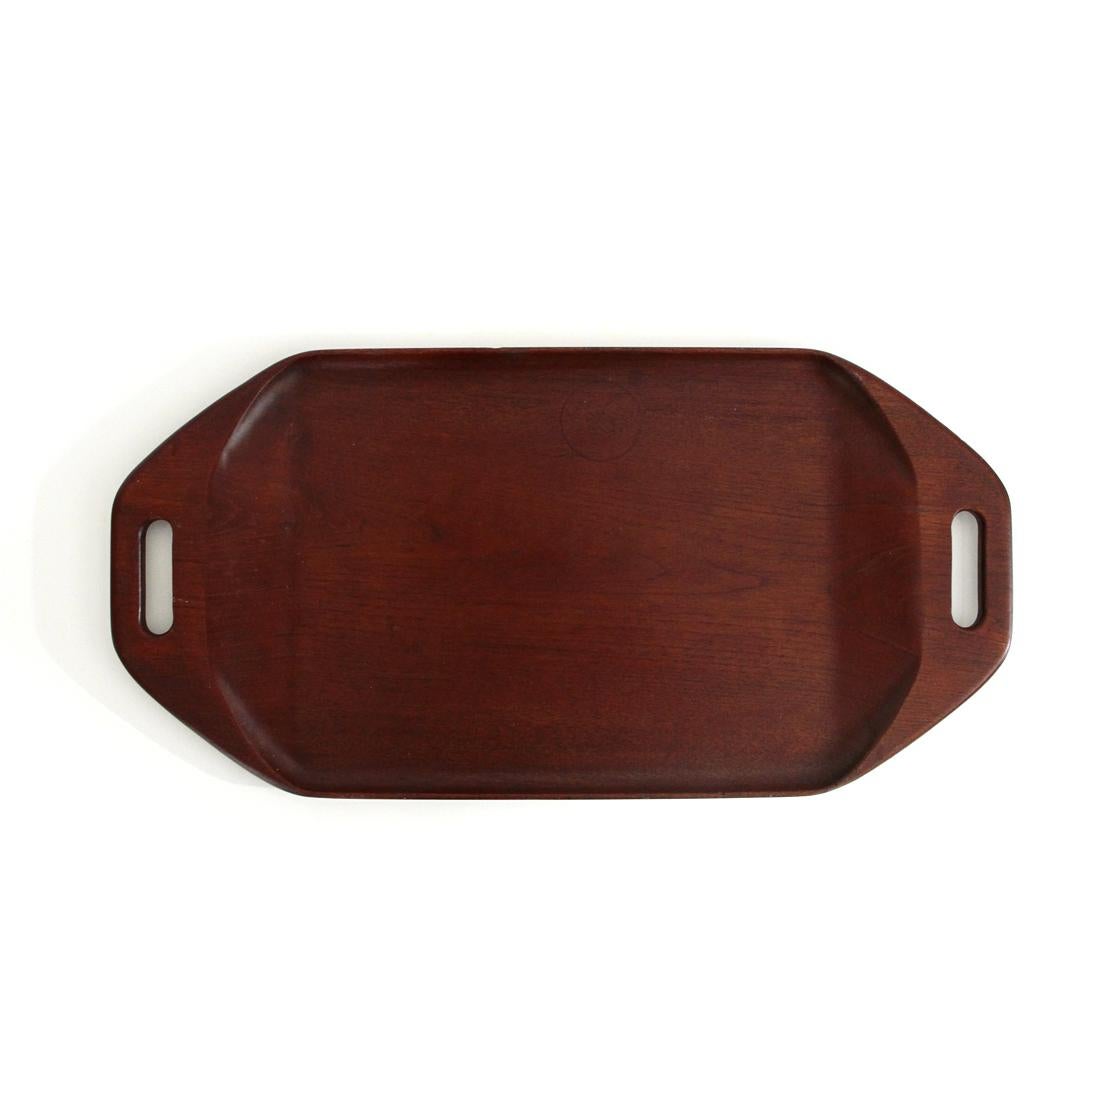 Danish-made tray produced in the 1960s.
Shaped teak structure with handles.
Good general conditions, some marks and halos due to normal use over time.

Dimensions: Length 65 cm, depth 32 cm, height 2.5 cm.